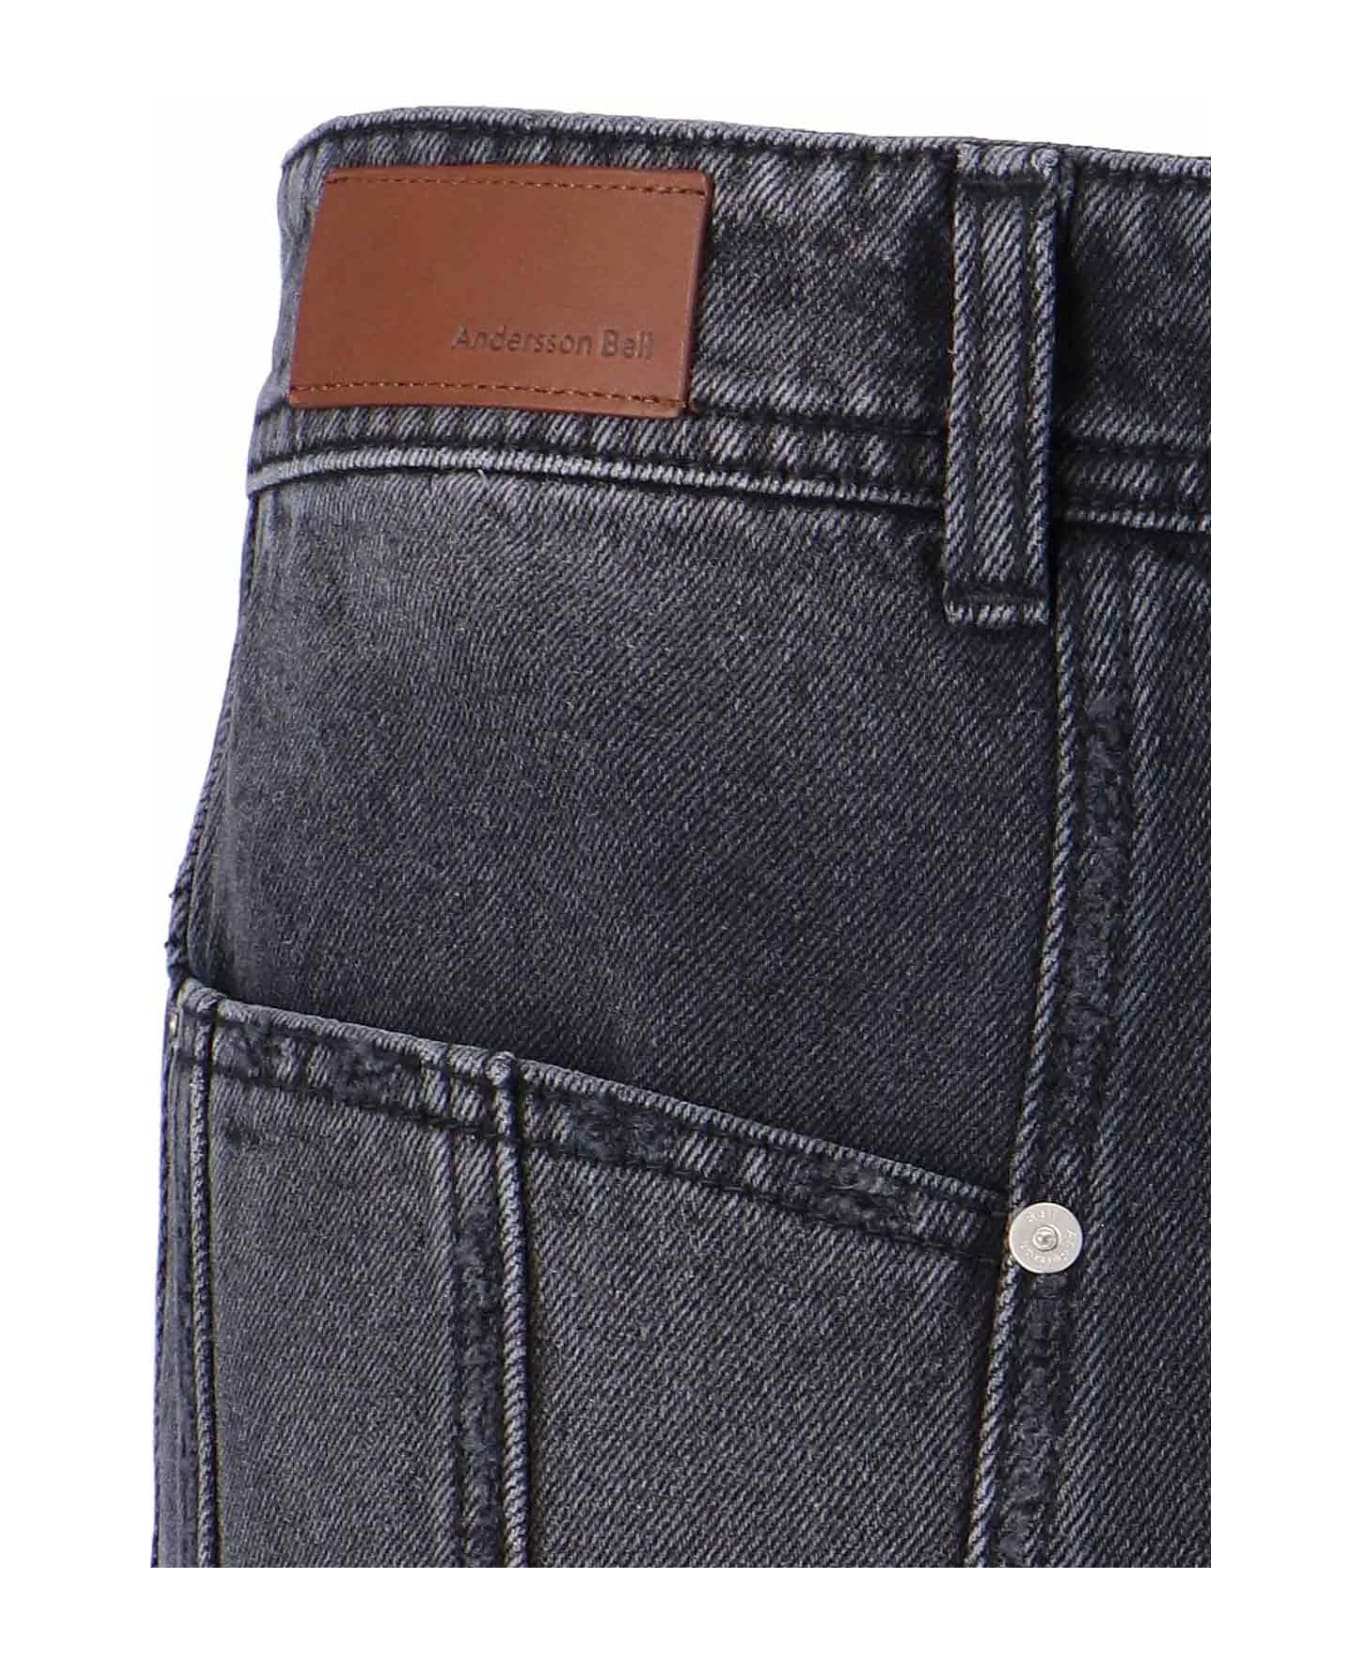 Andersson Bell Jeans - Black